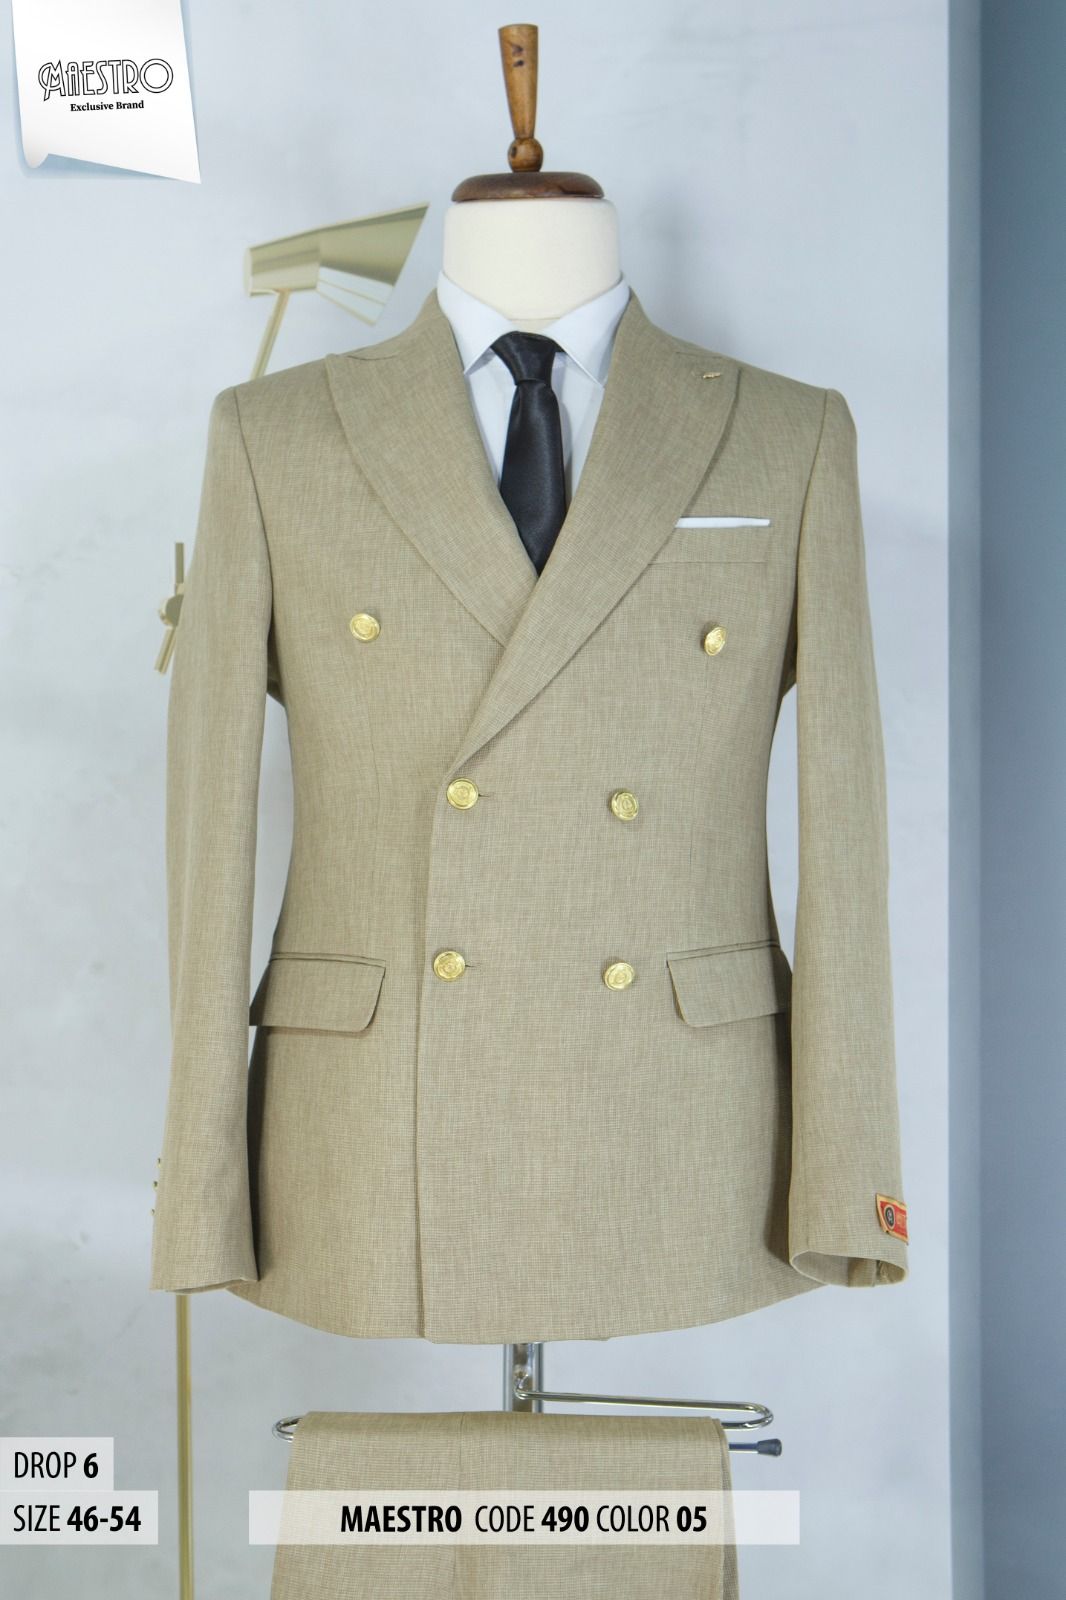 EXECUTIVE LIGHT GREY 3 PIECE TURKEY SUIT WITH GOLDEN BUTTON [SWNL]